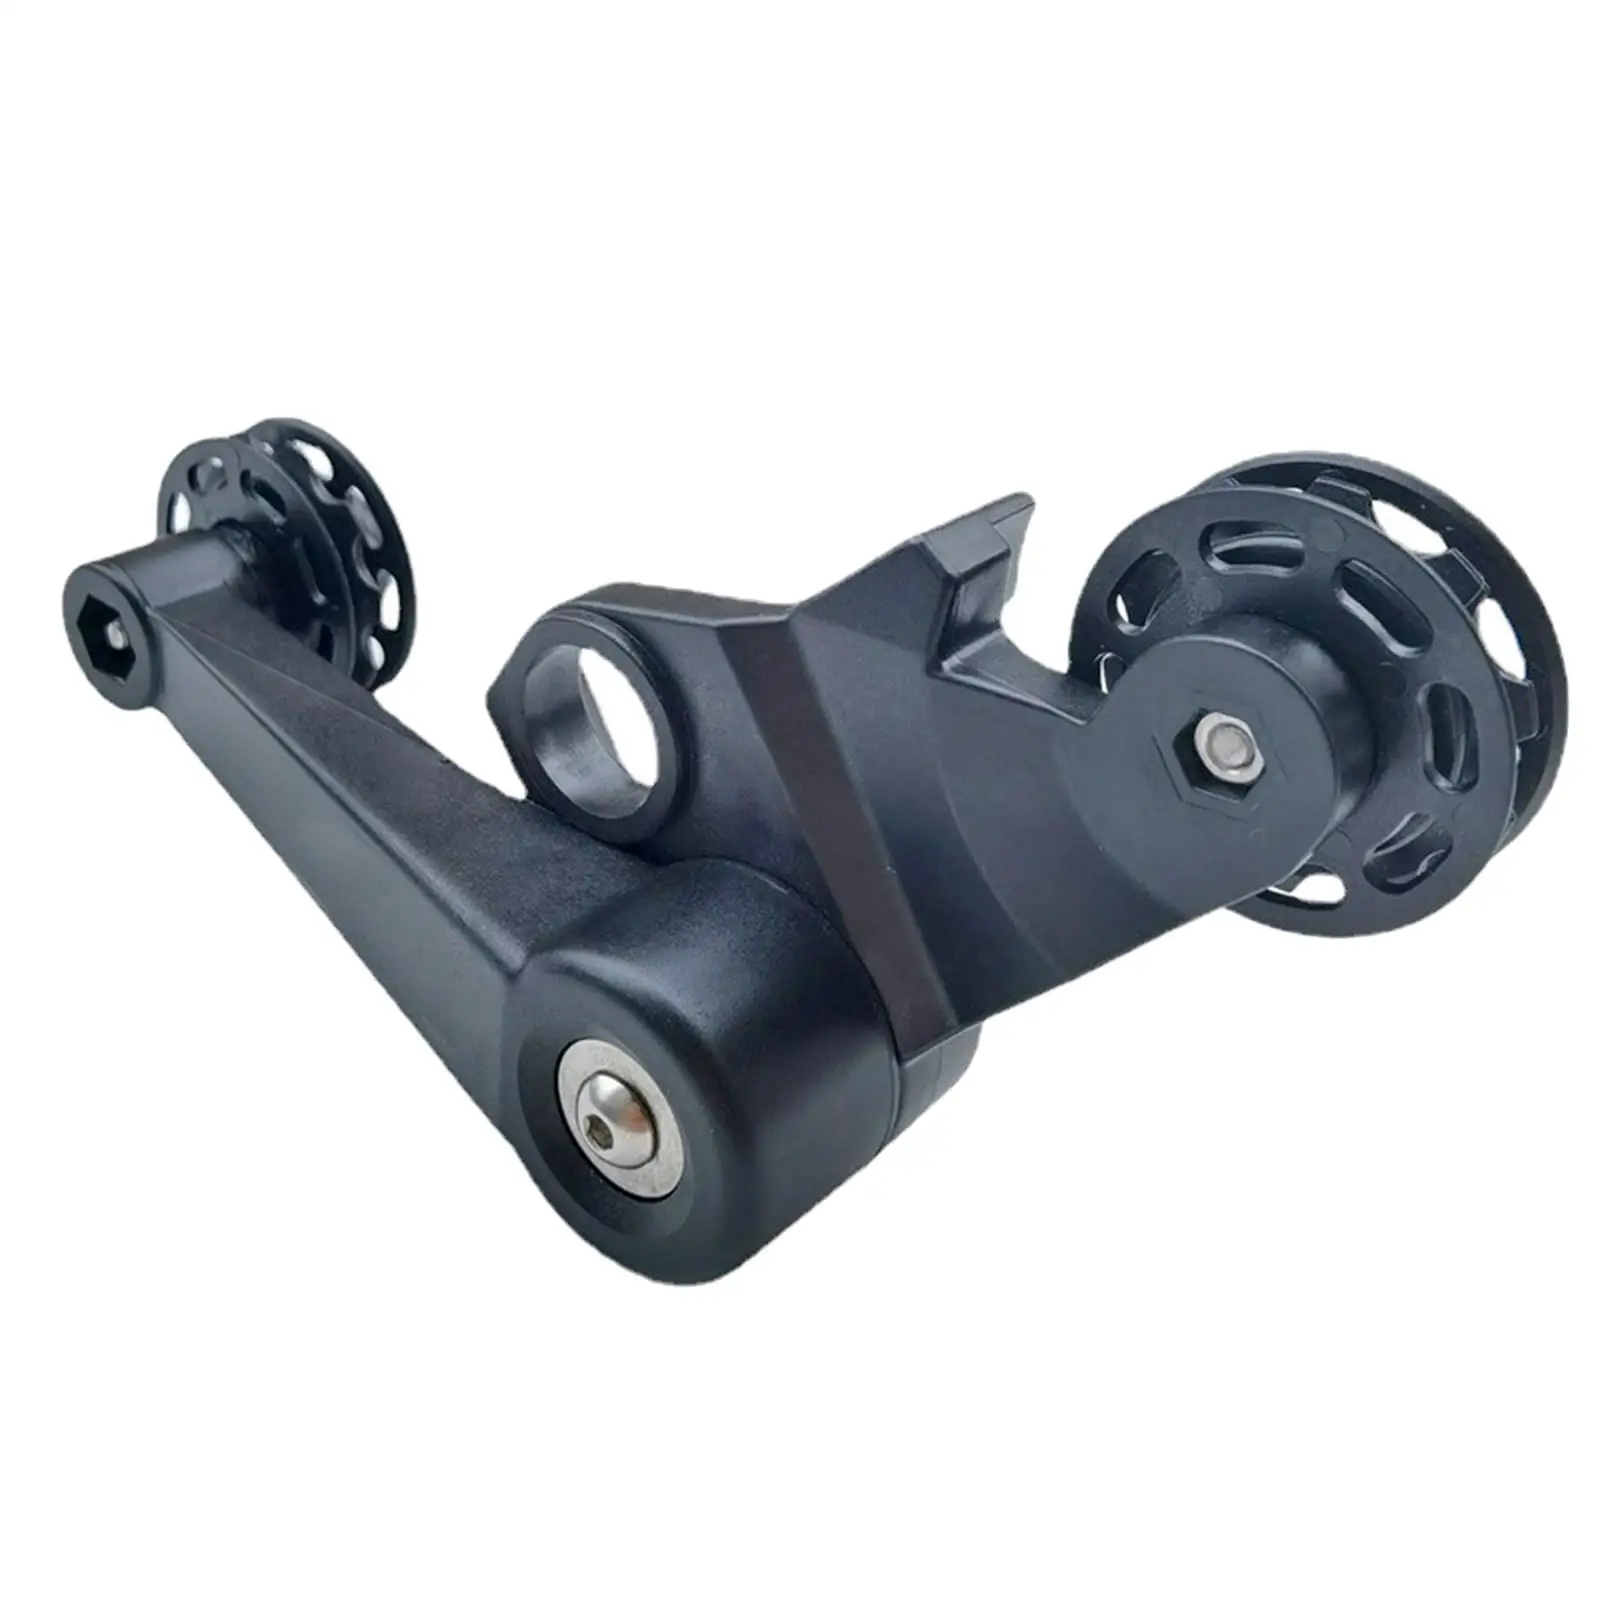 Bike Chain Tensioner CNC Rear Derailleur Single Speed Bicycle Chain Stabilizer for Cycling Replacement Parts